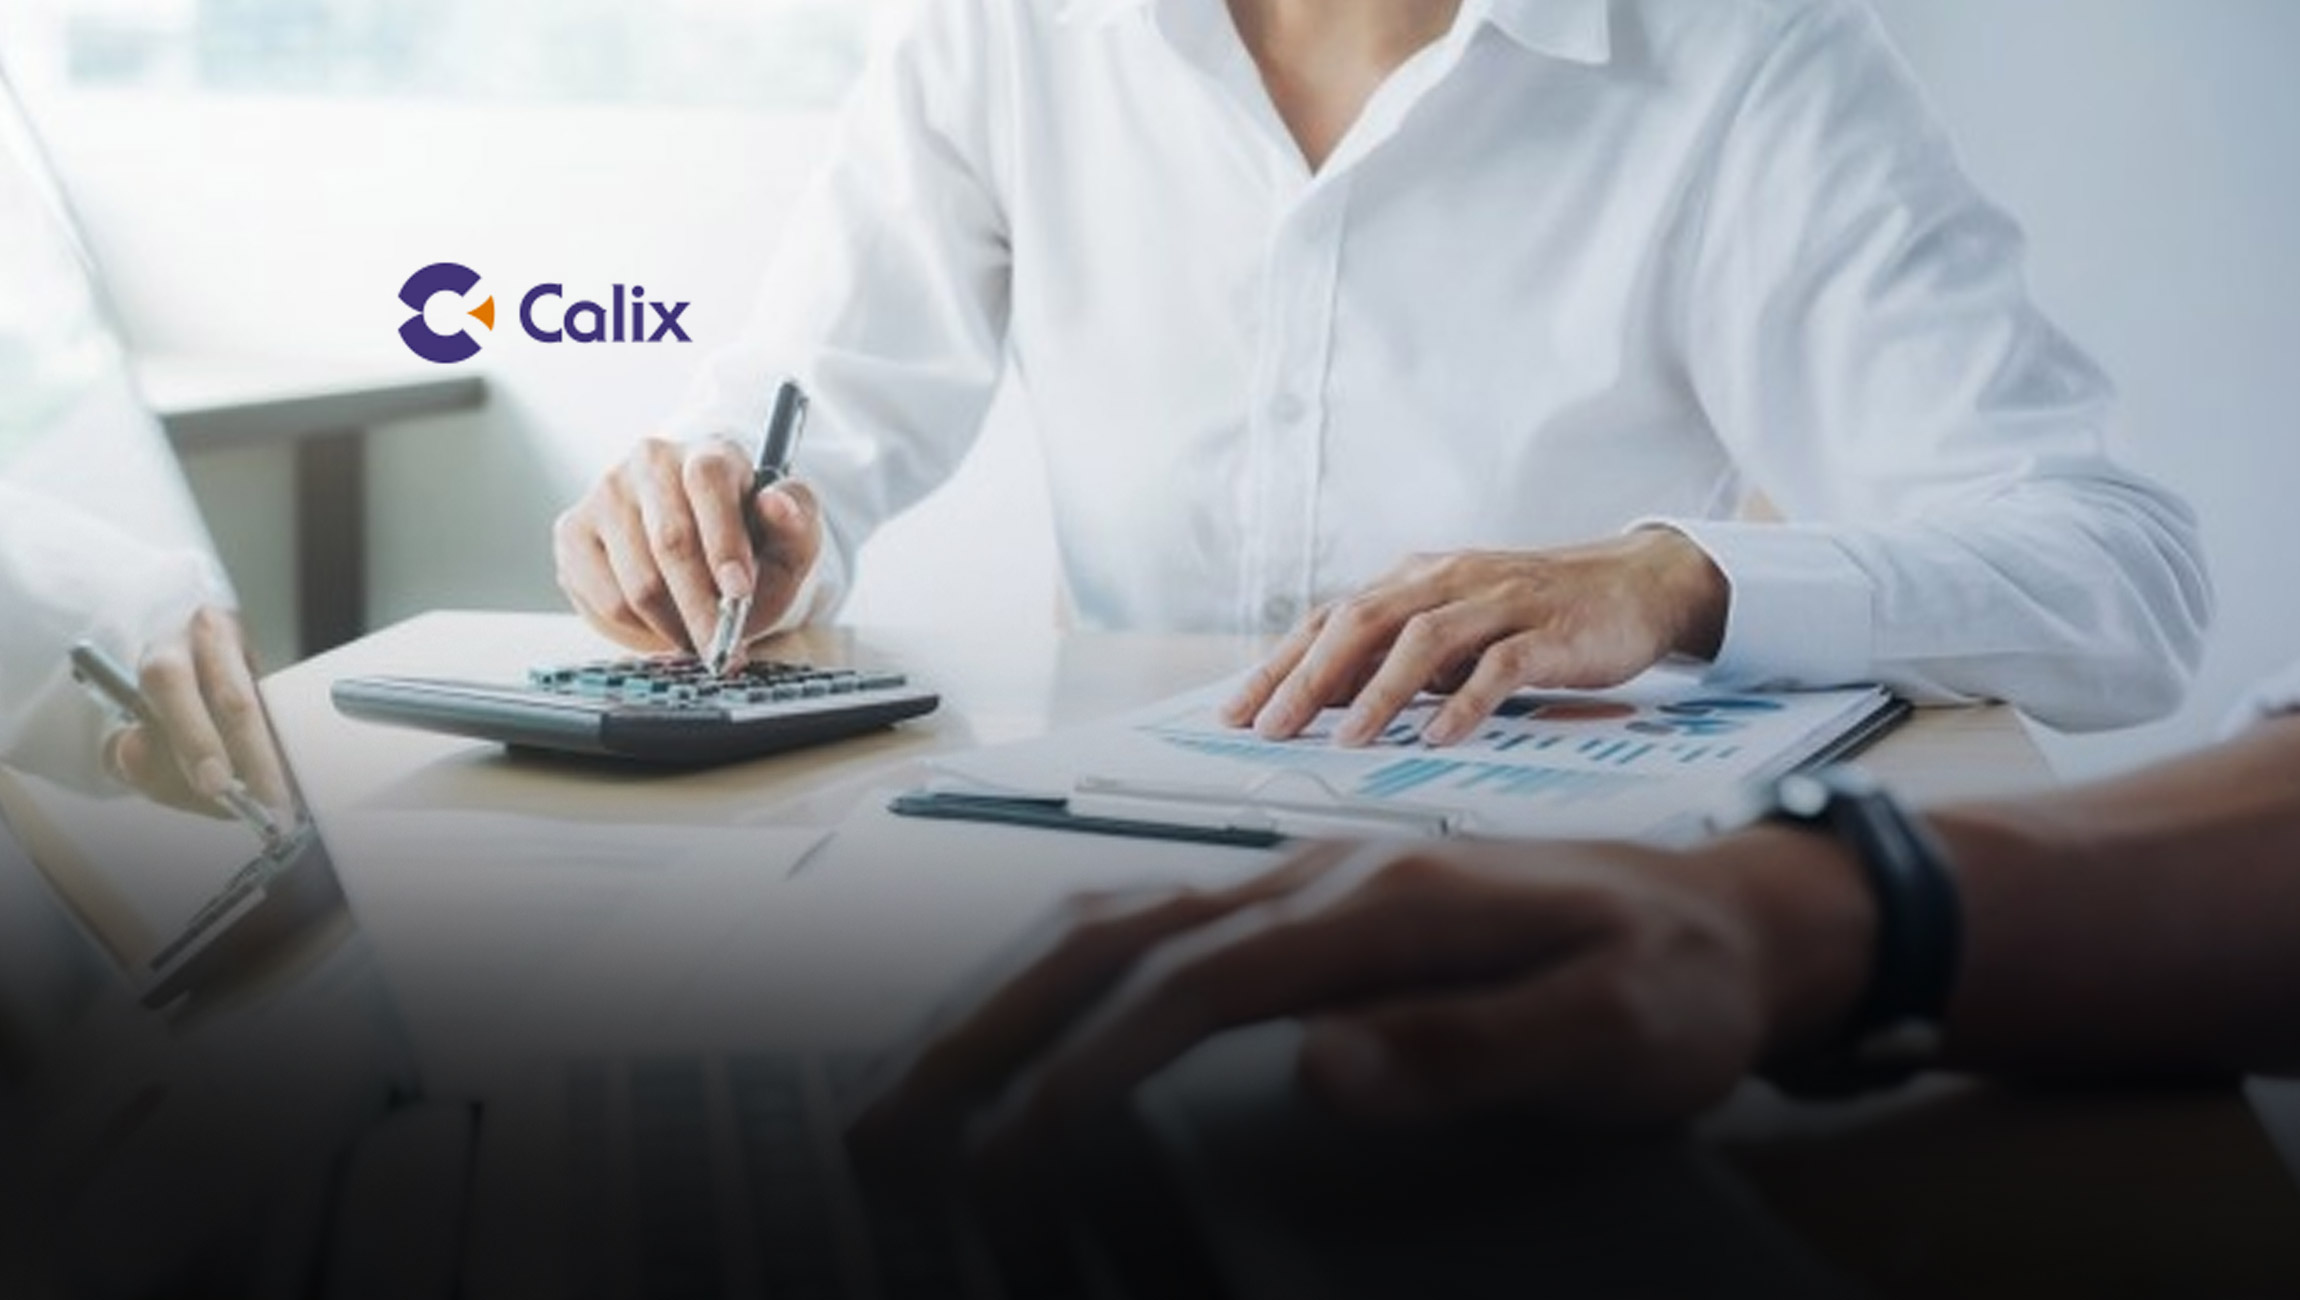 Calix Helps Marketers at Even the Smallest Service Providers Launch World-Class Marketing Campaigns and Subscriber Experiences to Defeat the Consumer Giants